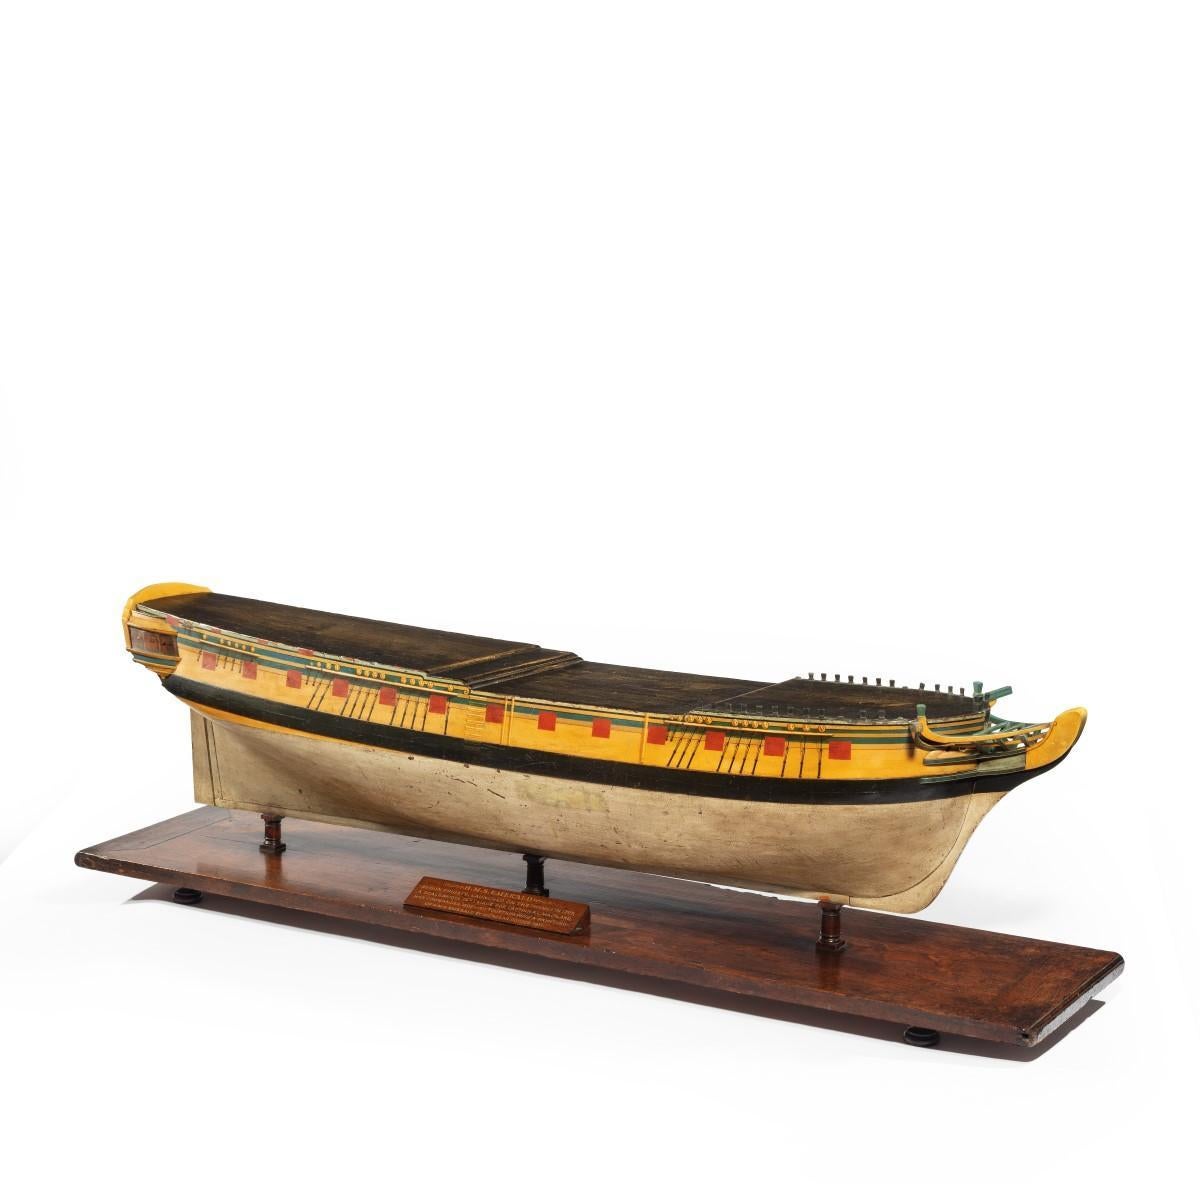 A carved and painted model of HMS Emerald, 1811, the frigate finely modelled and painted with a white hull, black plimsole line, yellow topsides and red cannon ports, raised on the original mahogany stand with turned feet and a plaque reading